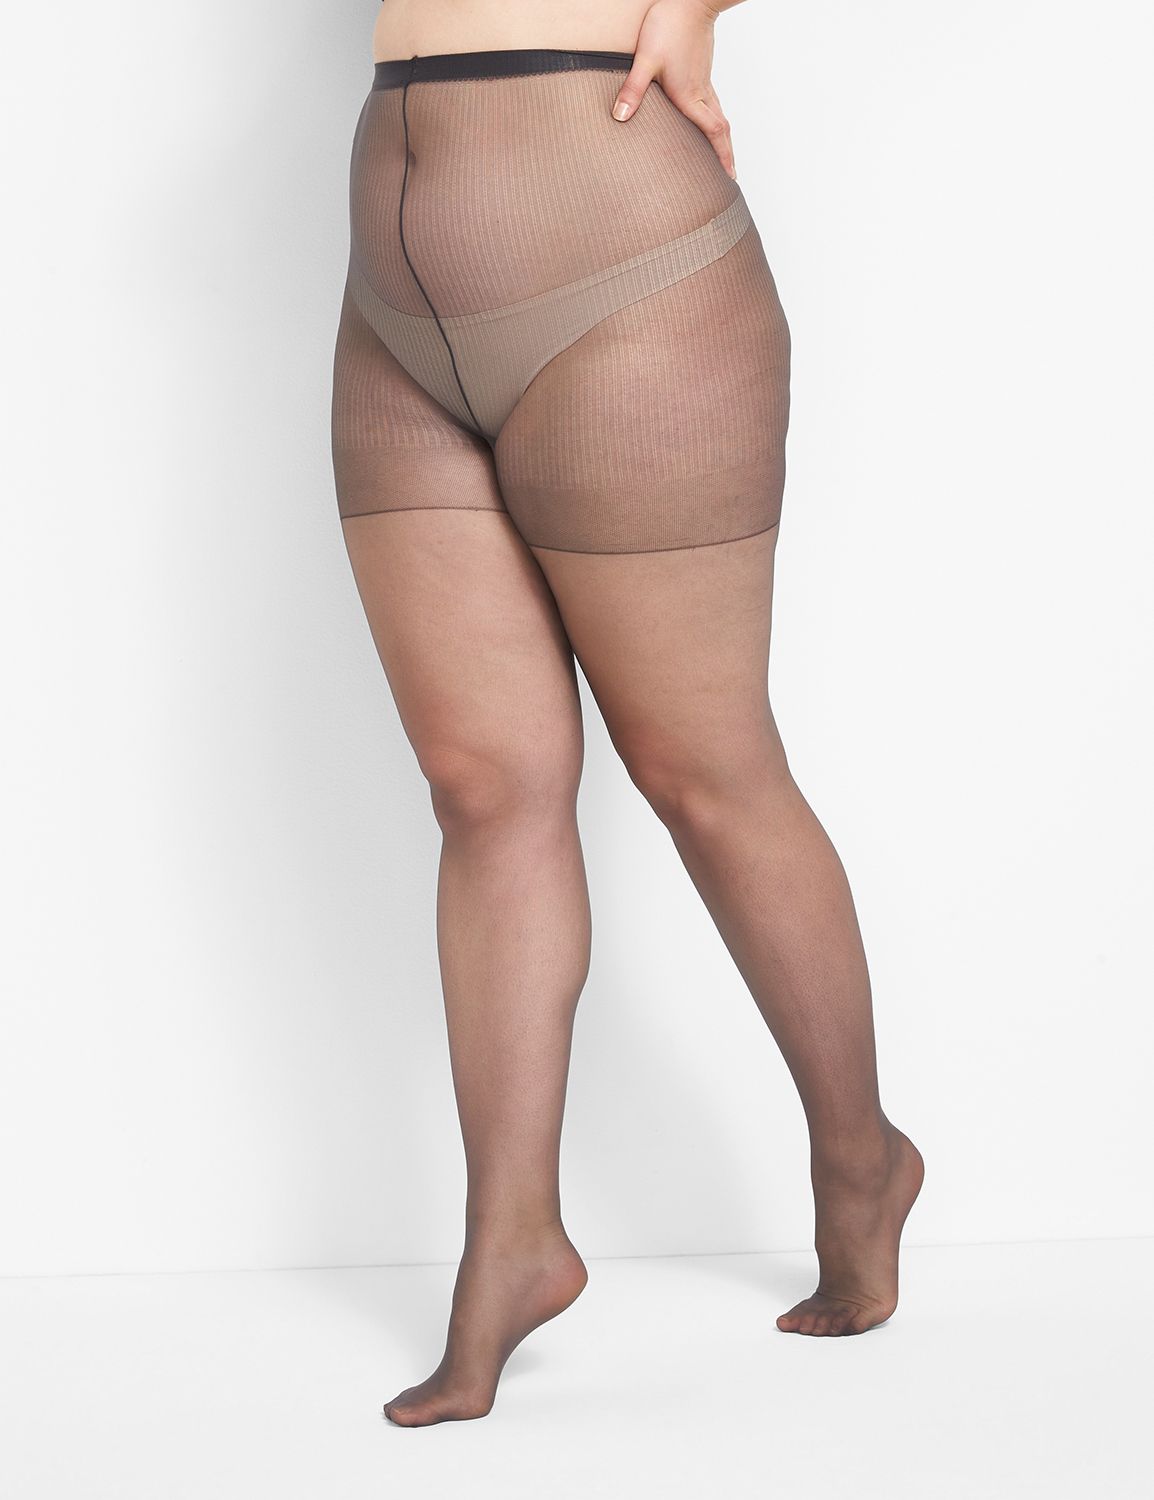 Lane Bryant - THE strapless bra of the summer. Cacique Boost Strapless, now  in 86 sizes! Bands 32-50. Cups A-K. #ForTheLoveOfCurves Shop: http:// lanebryant.us/otpDco